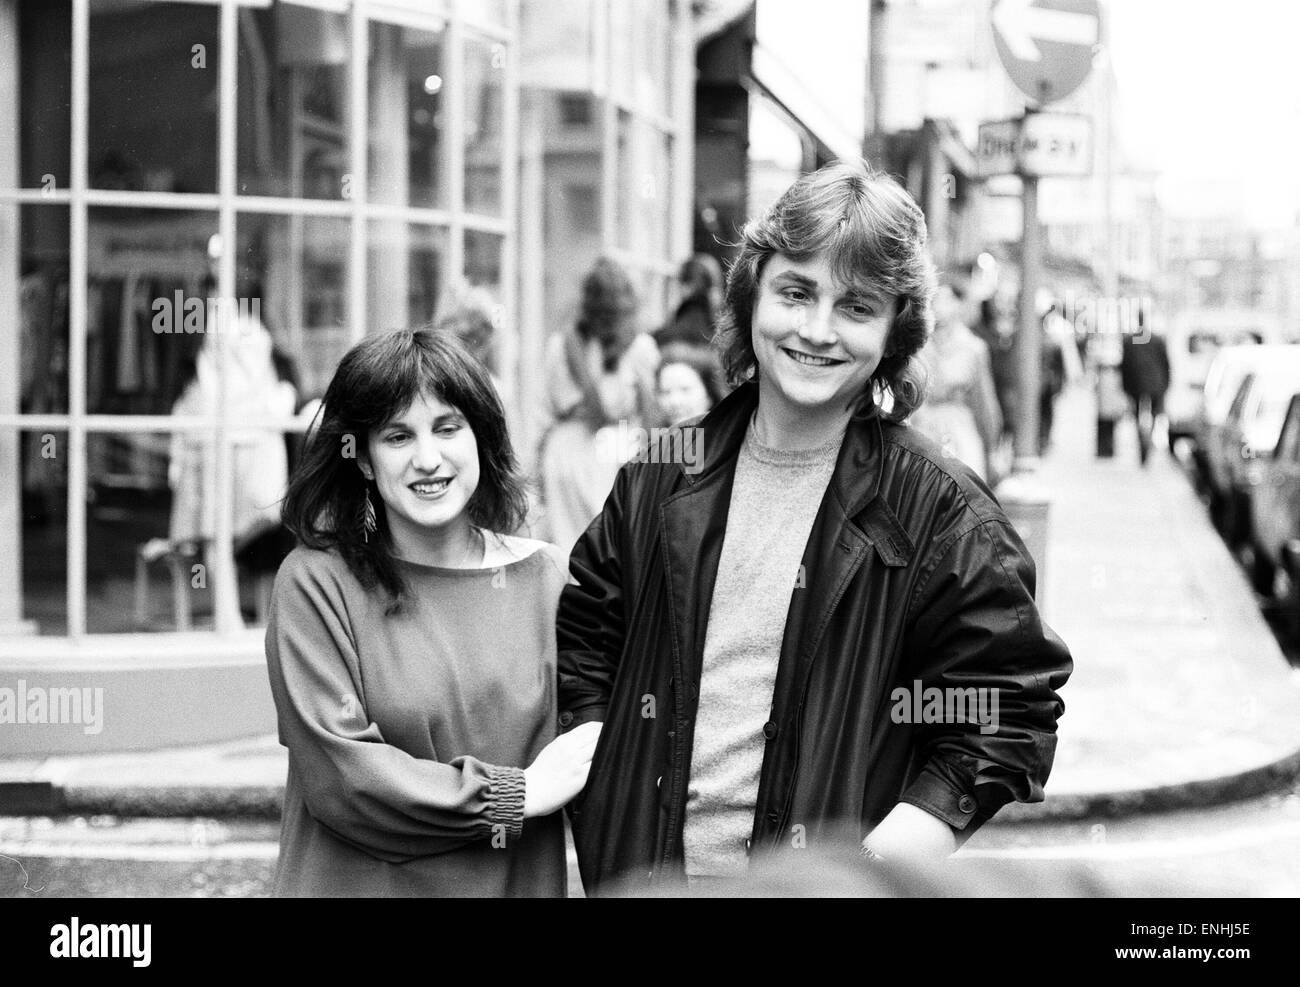 David & Elizabeth Emanuel, fashion designers, phootographed in Brooke Street, Mayfair, London, 11th March 1981. It was recently announced that they have been chosen to design the wedding dress of Lady Diana Spencer. Stock Photo